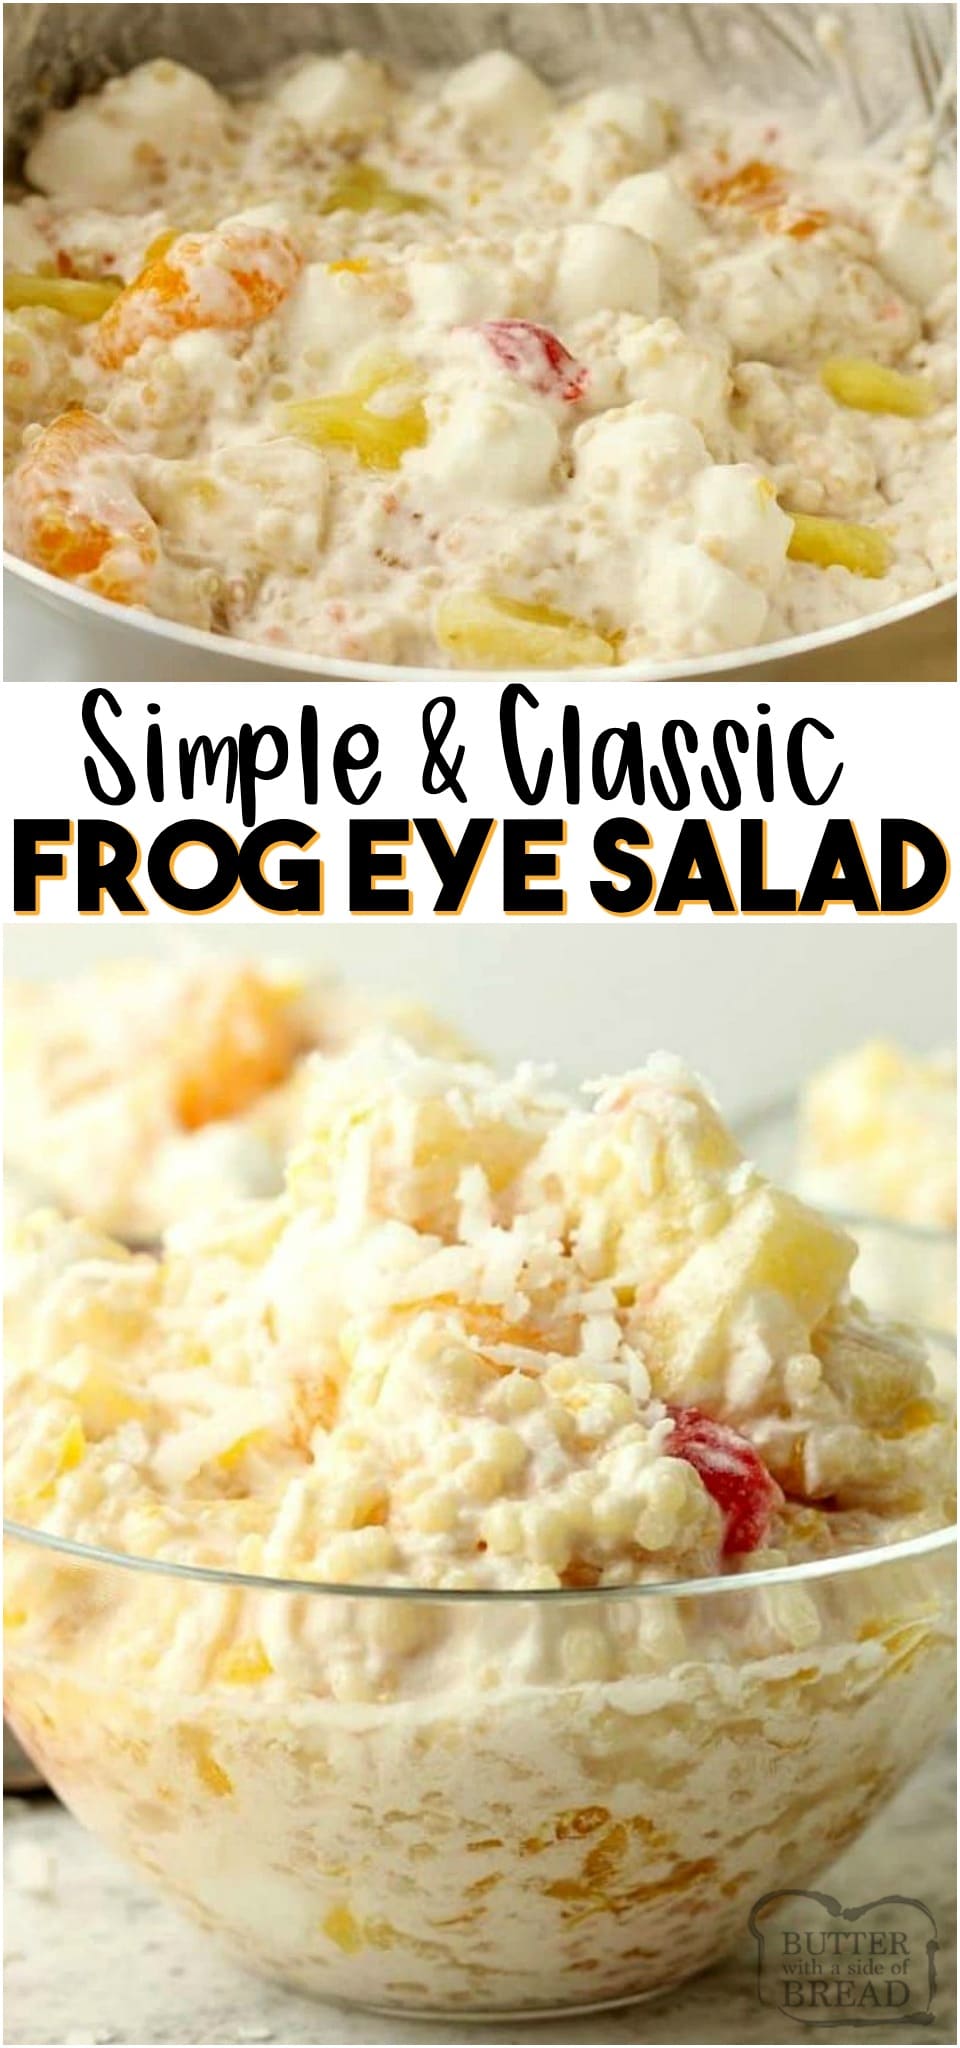 Frog Eye Salad is a classic pot luck recipe. This delicious sweet fruit salad has tiny pasta, mandarin oranges, pineapple, whipped topping, marshmallows, coconut and sweet cherries.